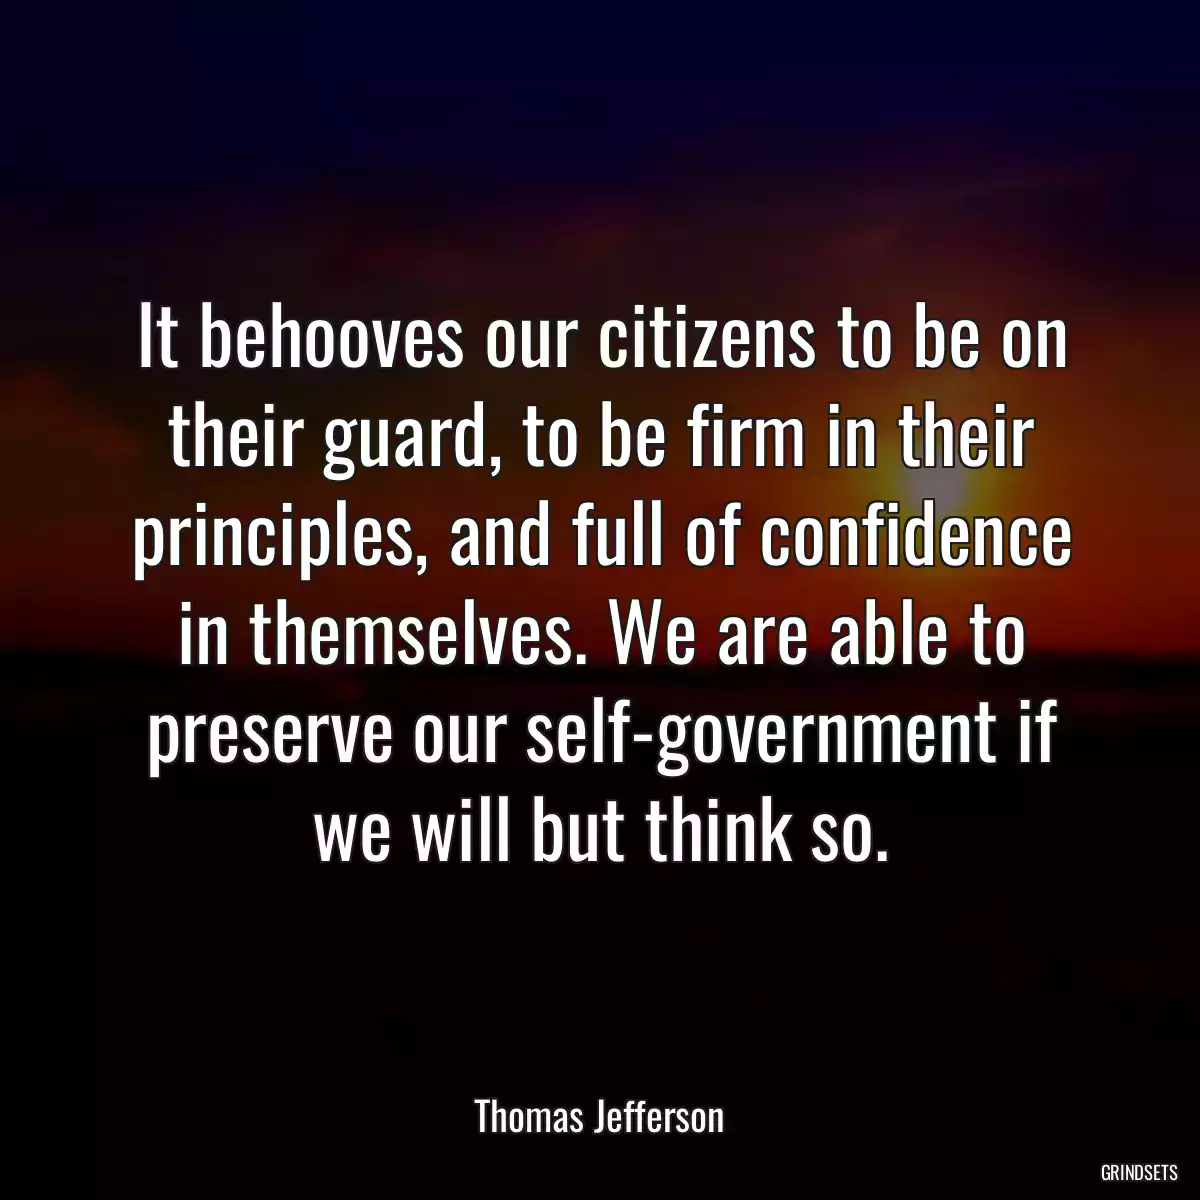 It behooves our citizens to be on their guard, to be firm in their principles, and full of confidence in themselves. We are able to preserve our self-government if we will but think so.